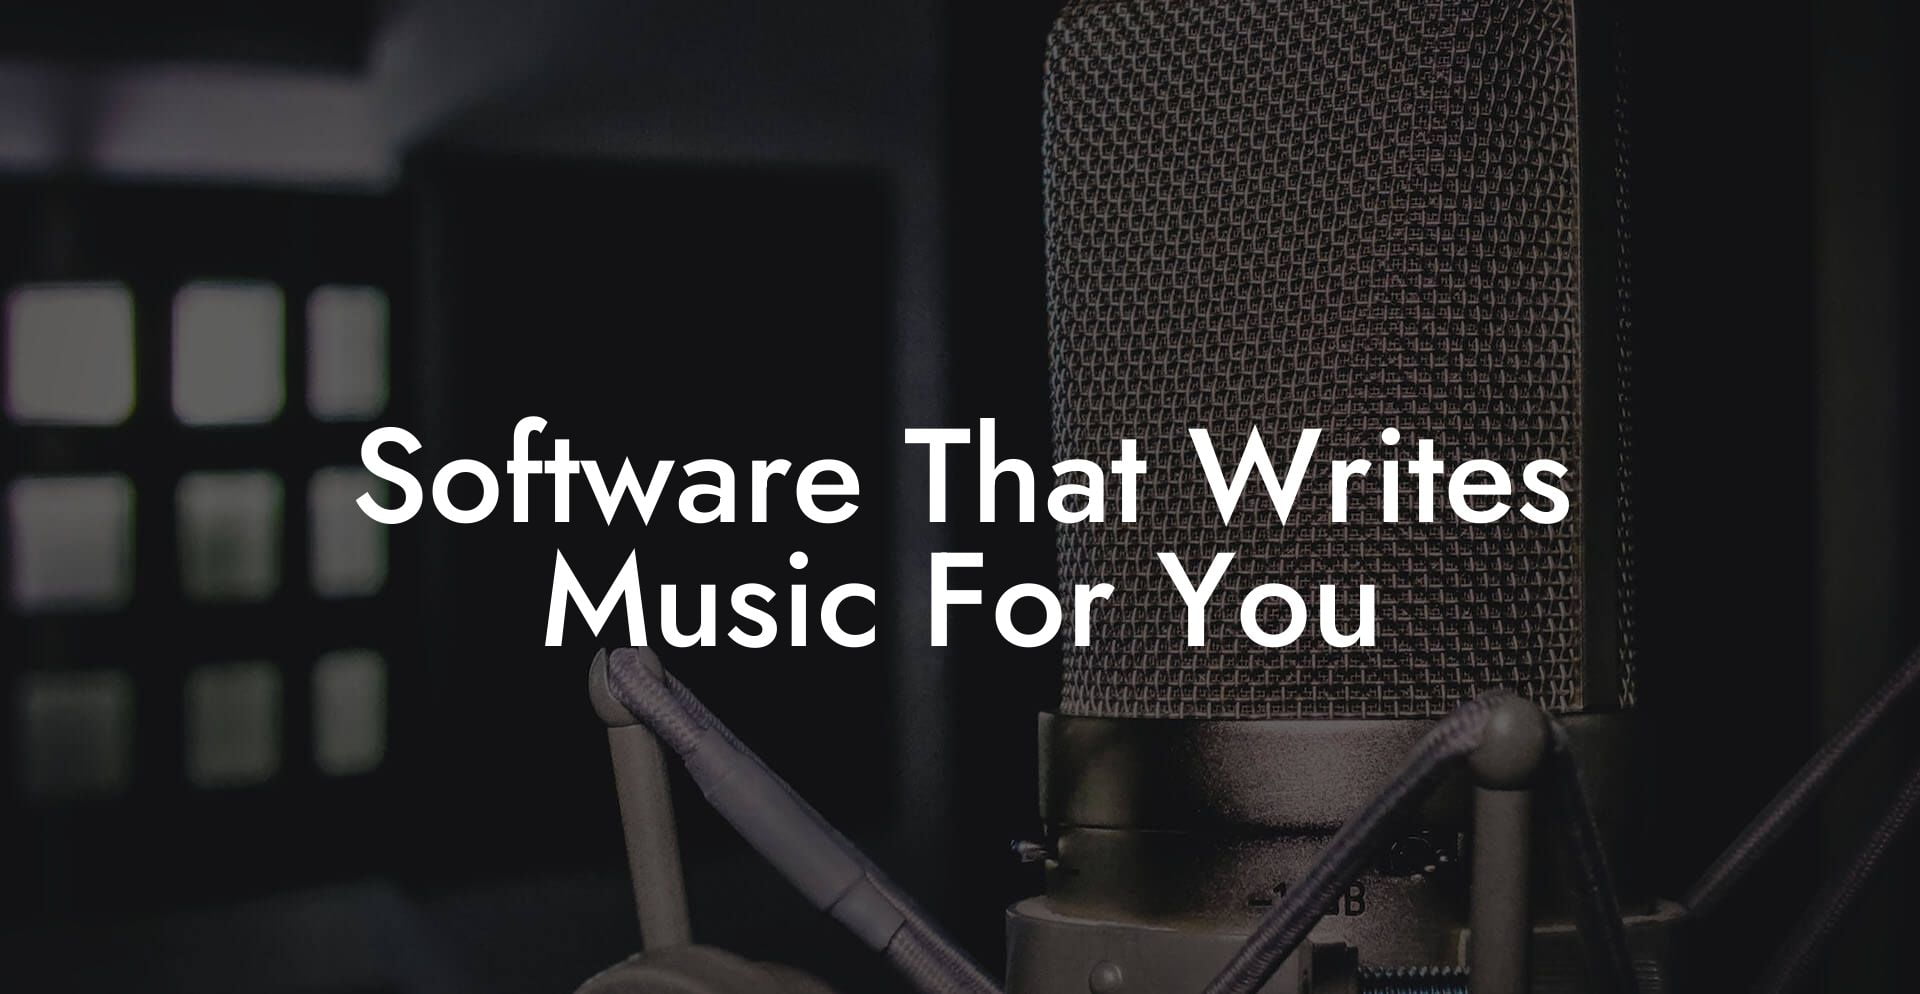 software that writes music for you lyric assistant